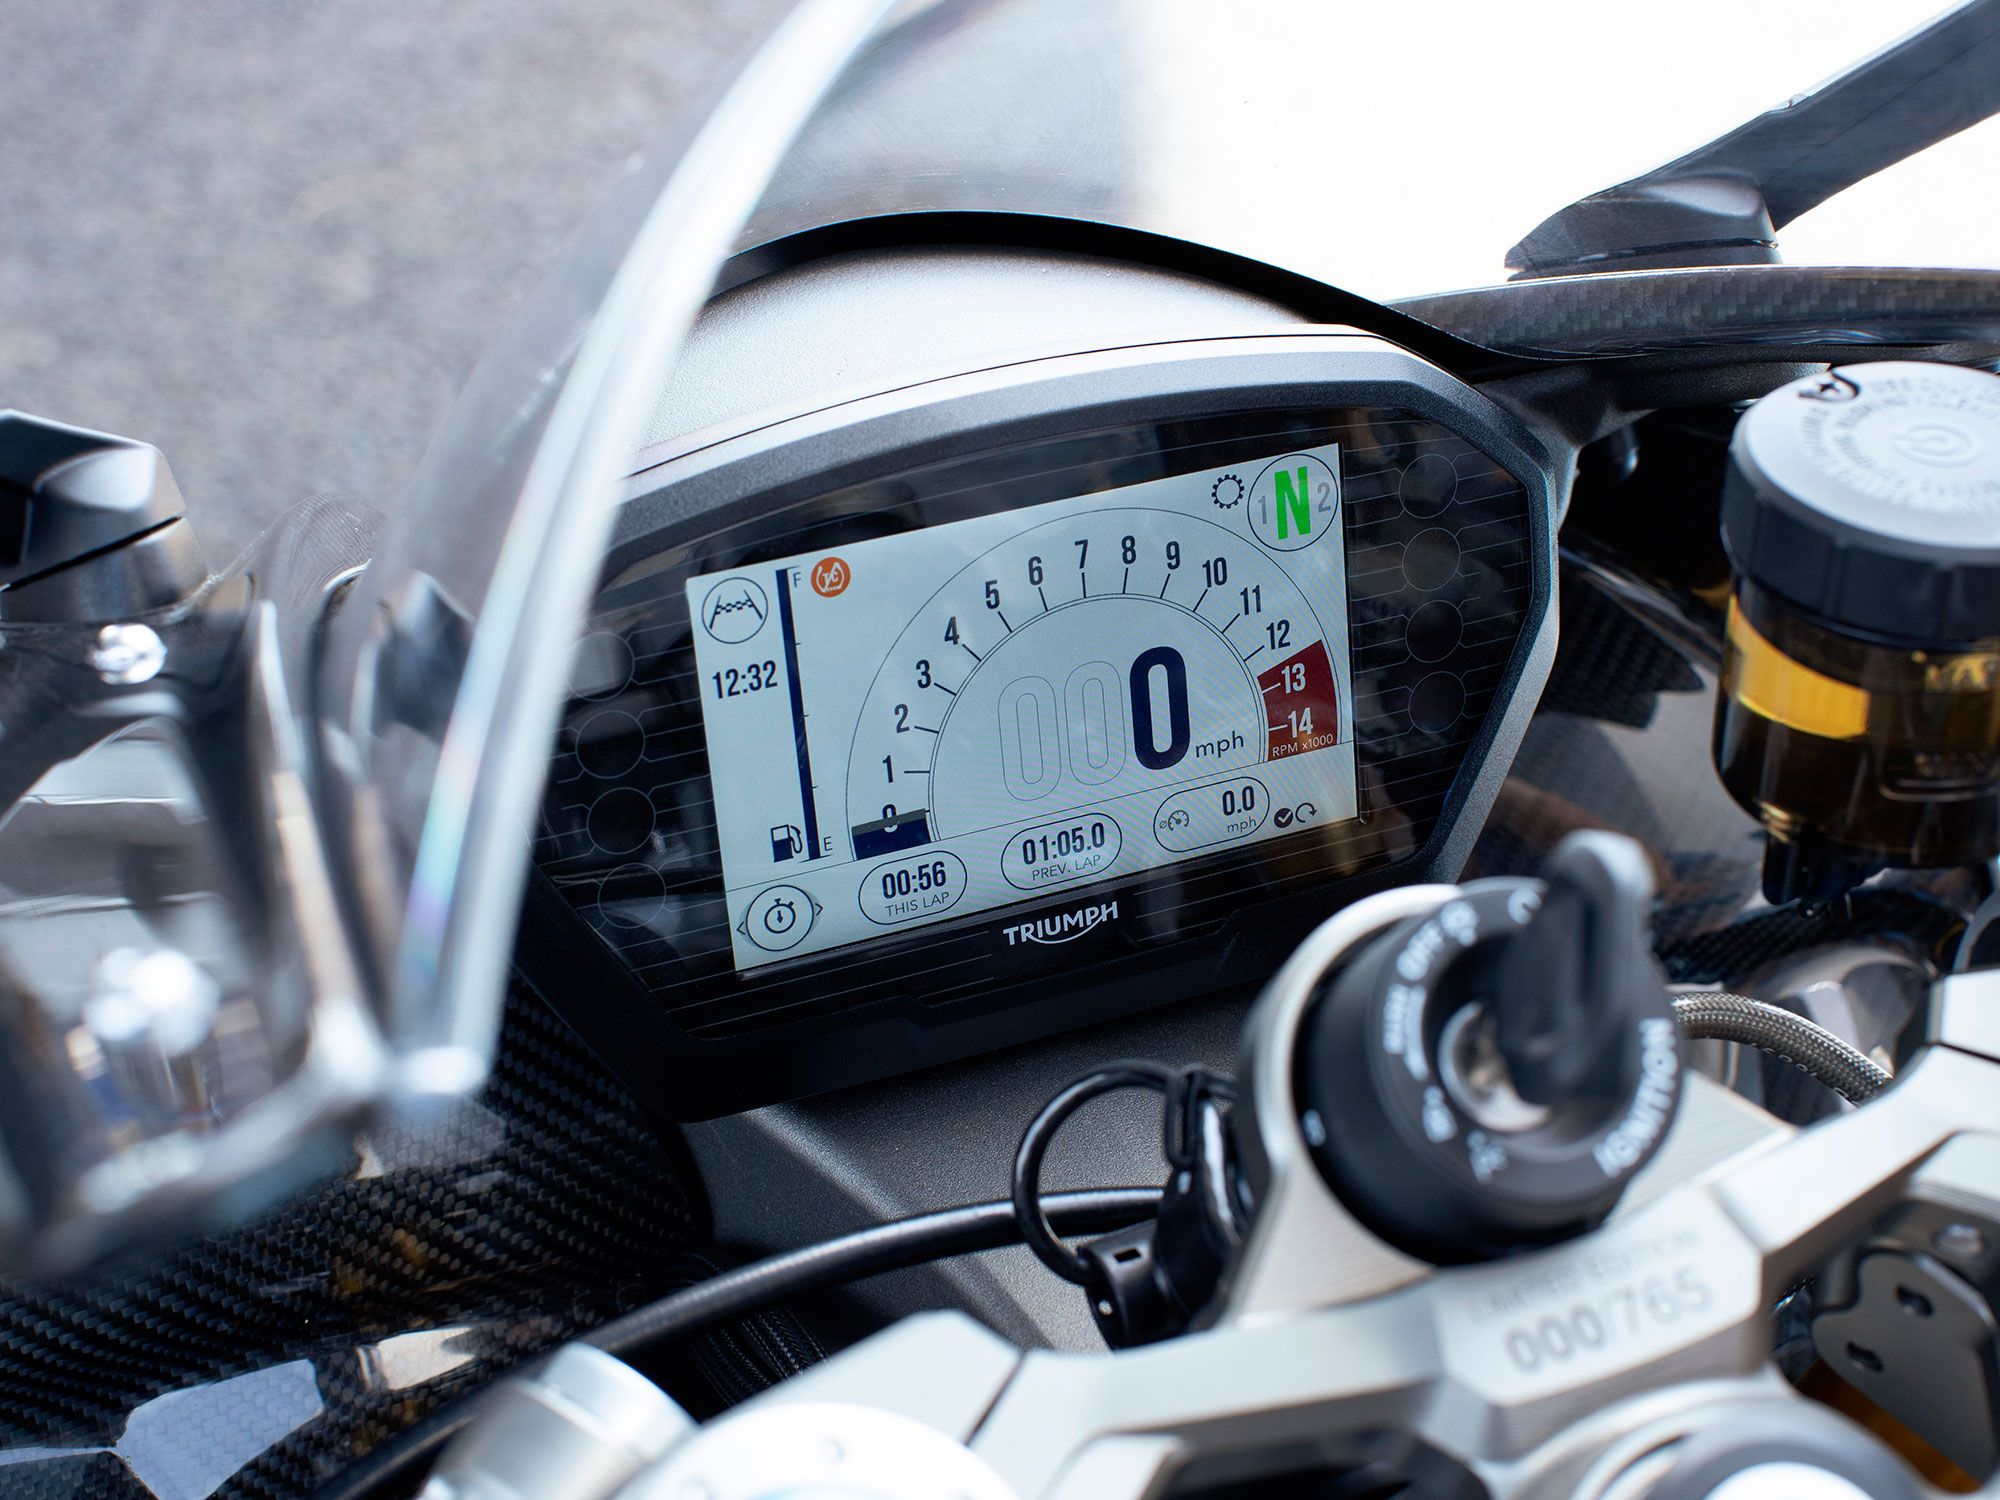 The Daytona Moto2 765 Limited Edition is graced with a color TFT display. It's angled a tad low and it could be brighter during daytime rides.